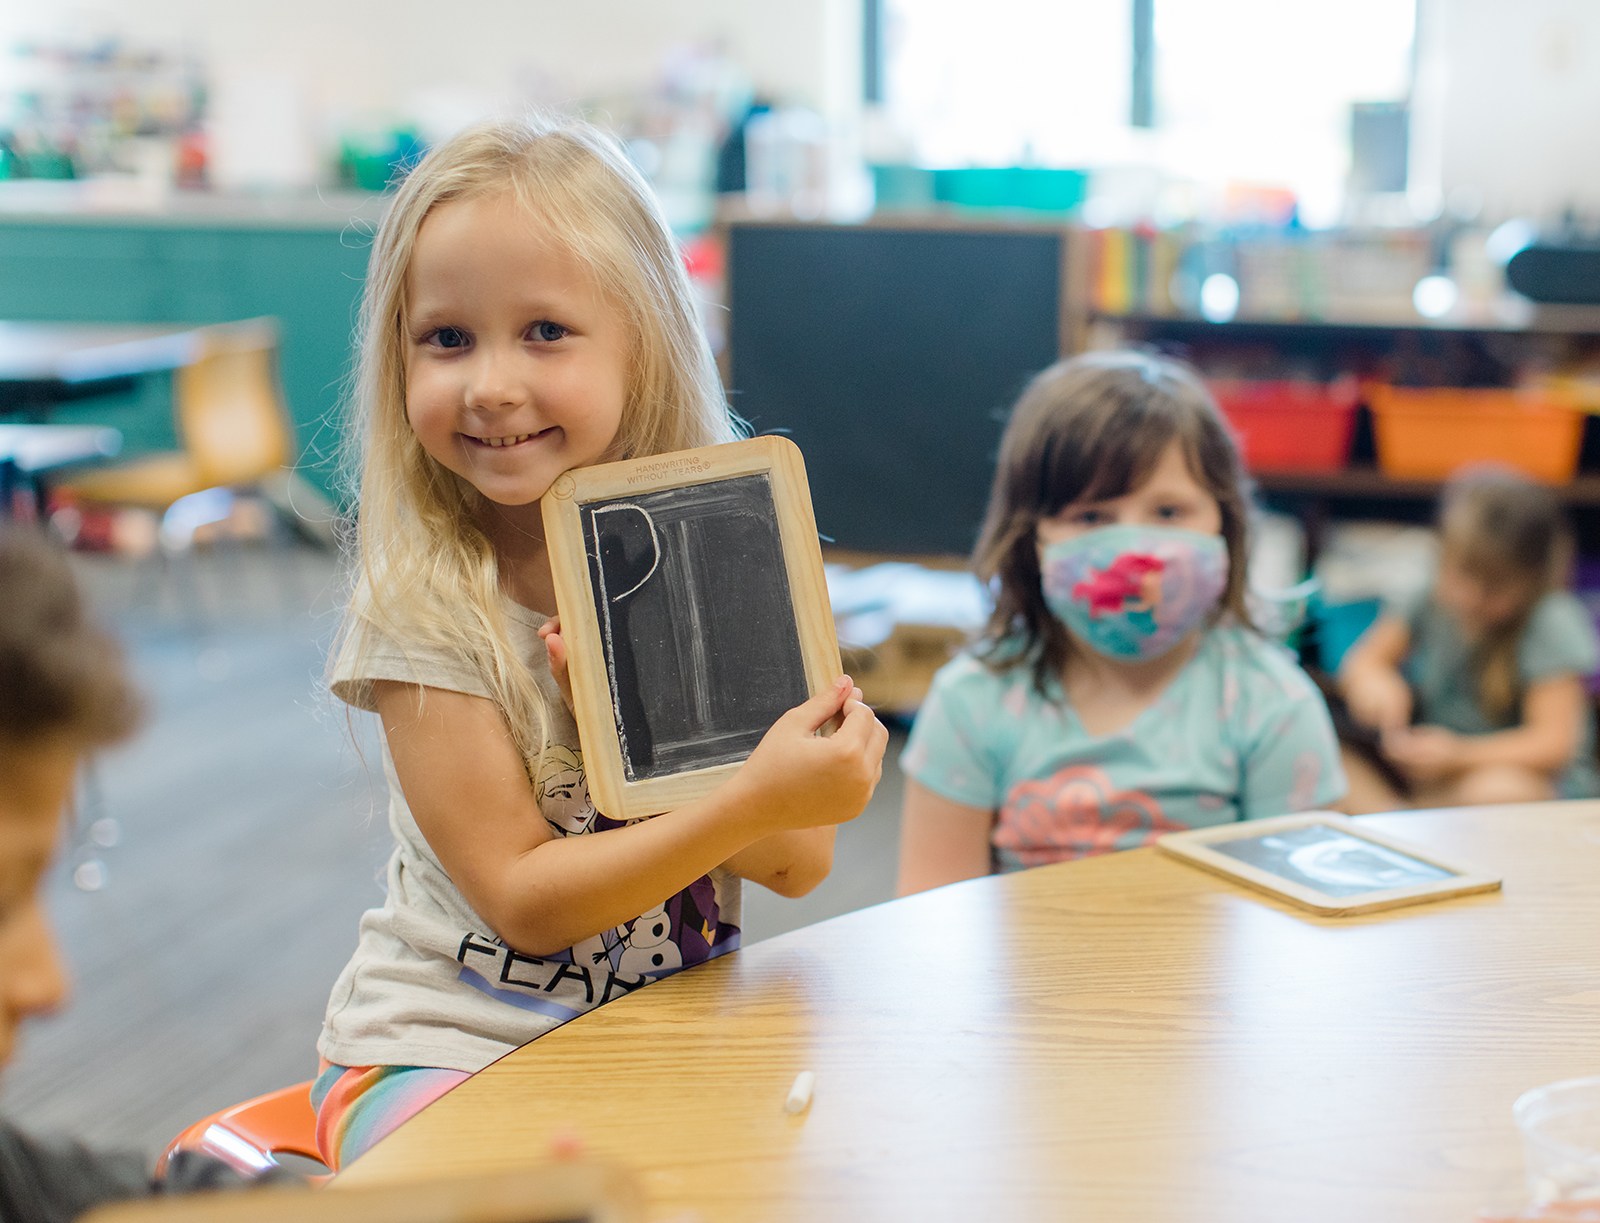 Preschool student shows off the letter P written on a handheld chalkboard